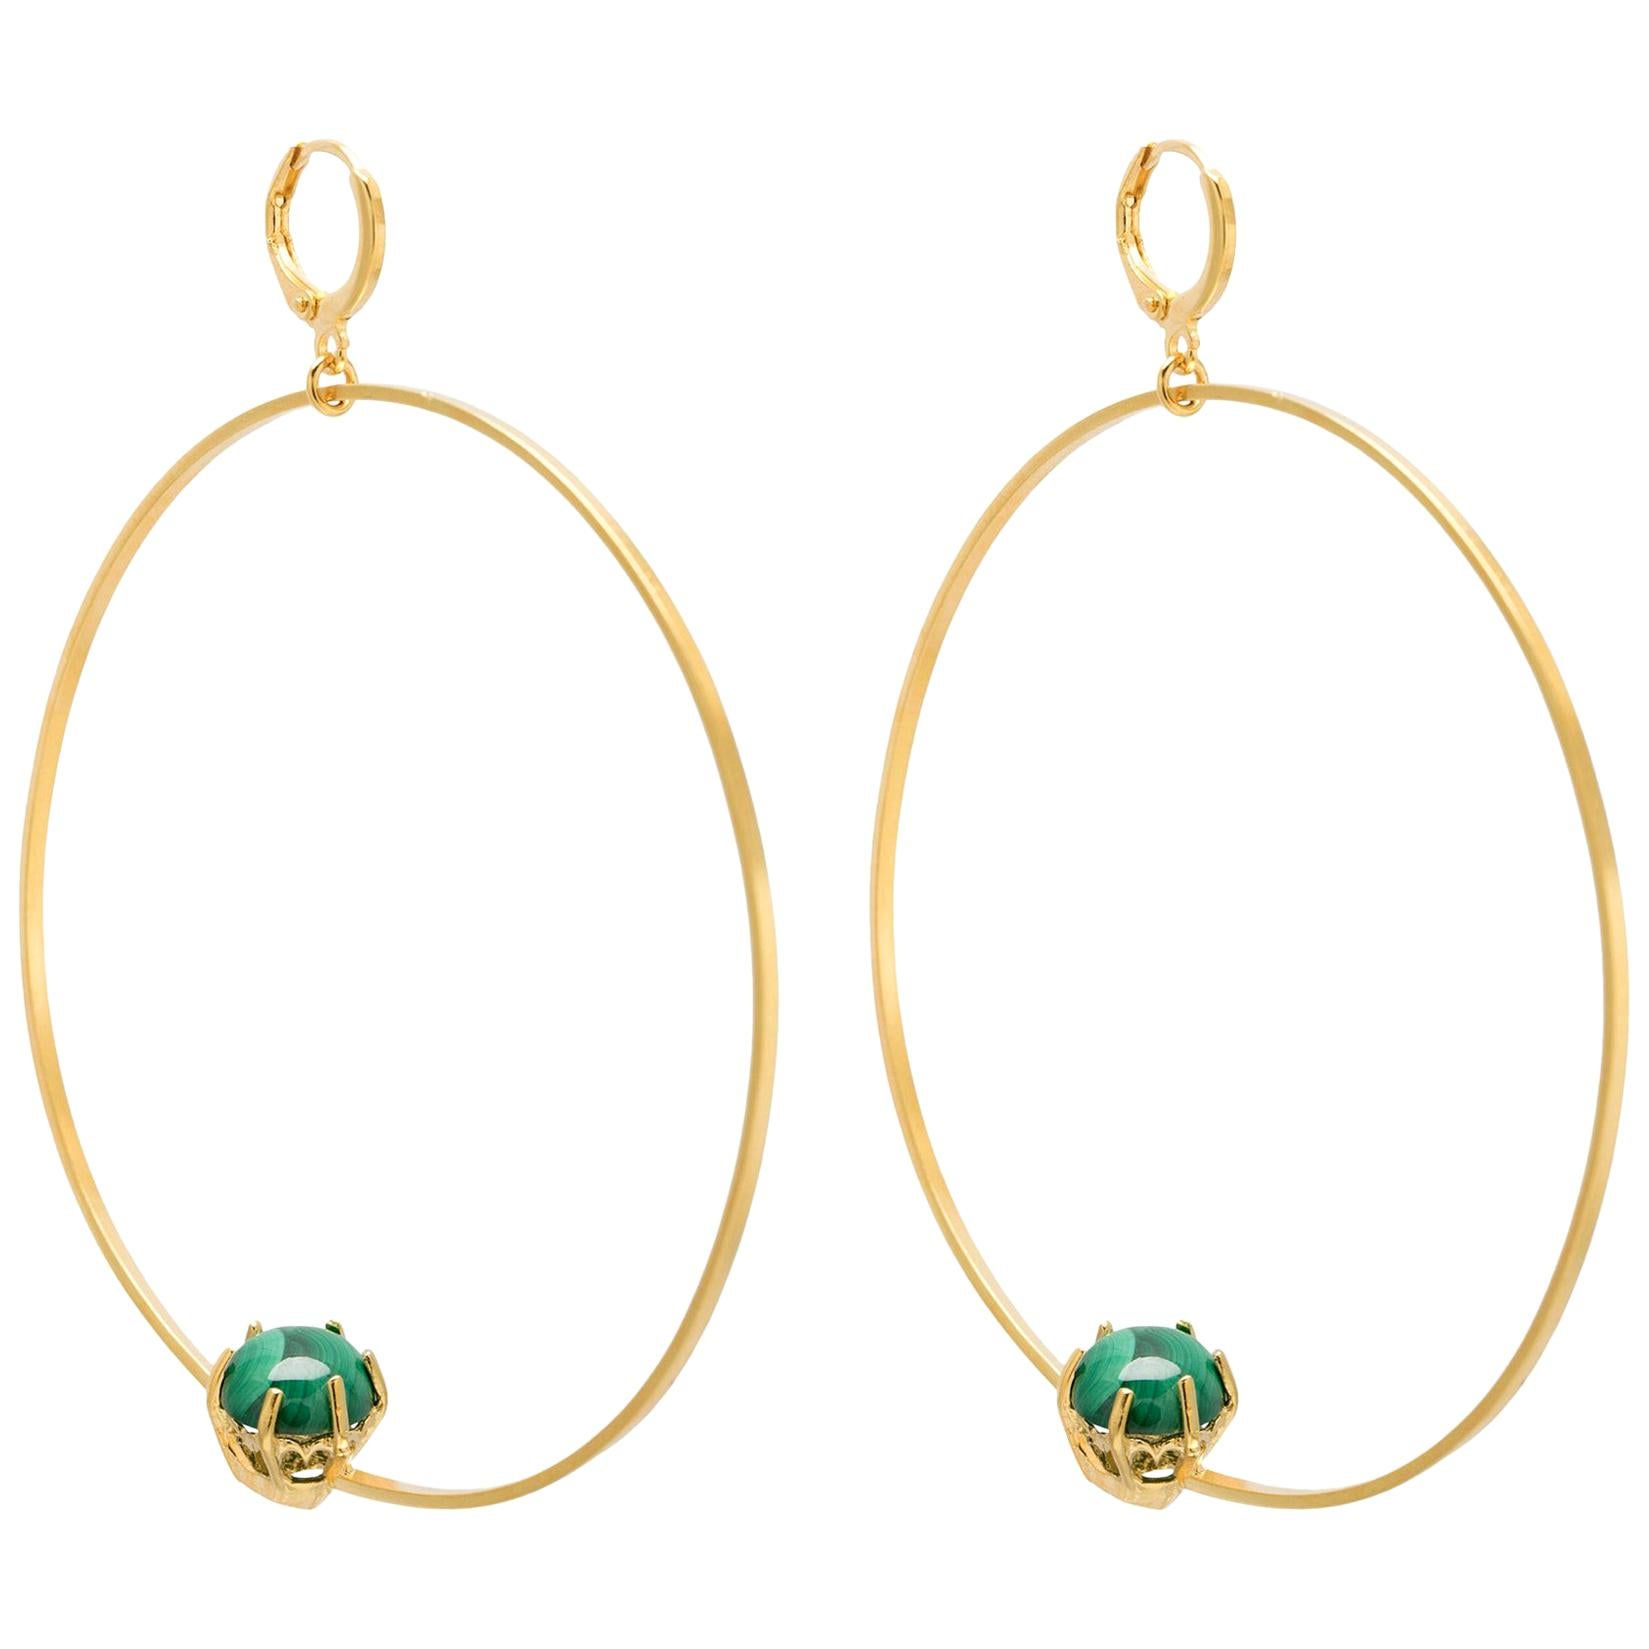 Large Hoop Earrings in Gold plated Silver and Malachite Round Stone For Sale